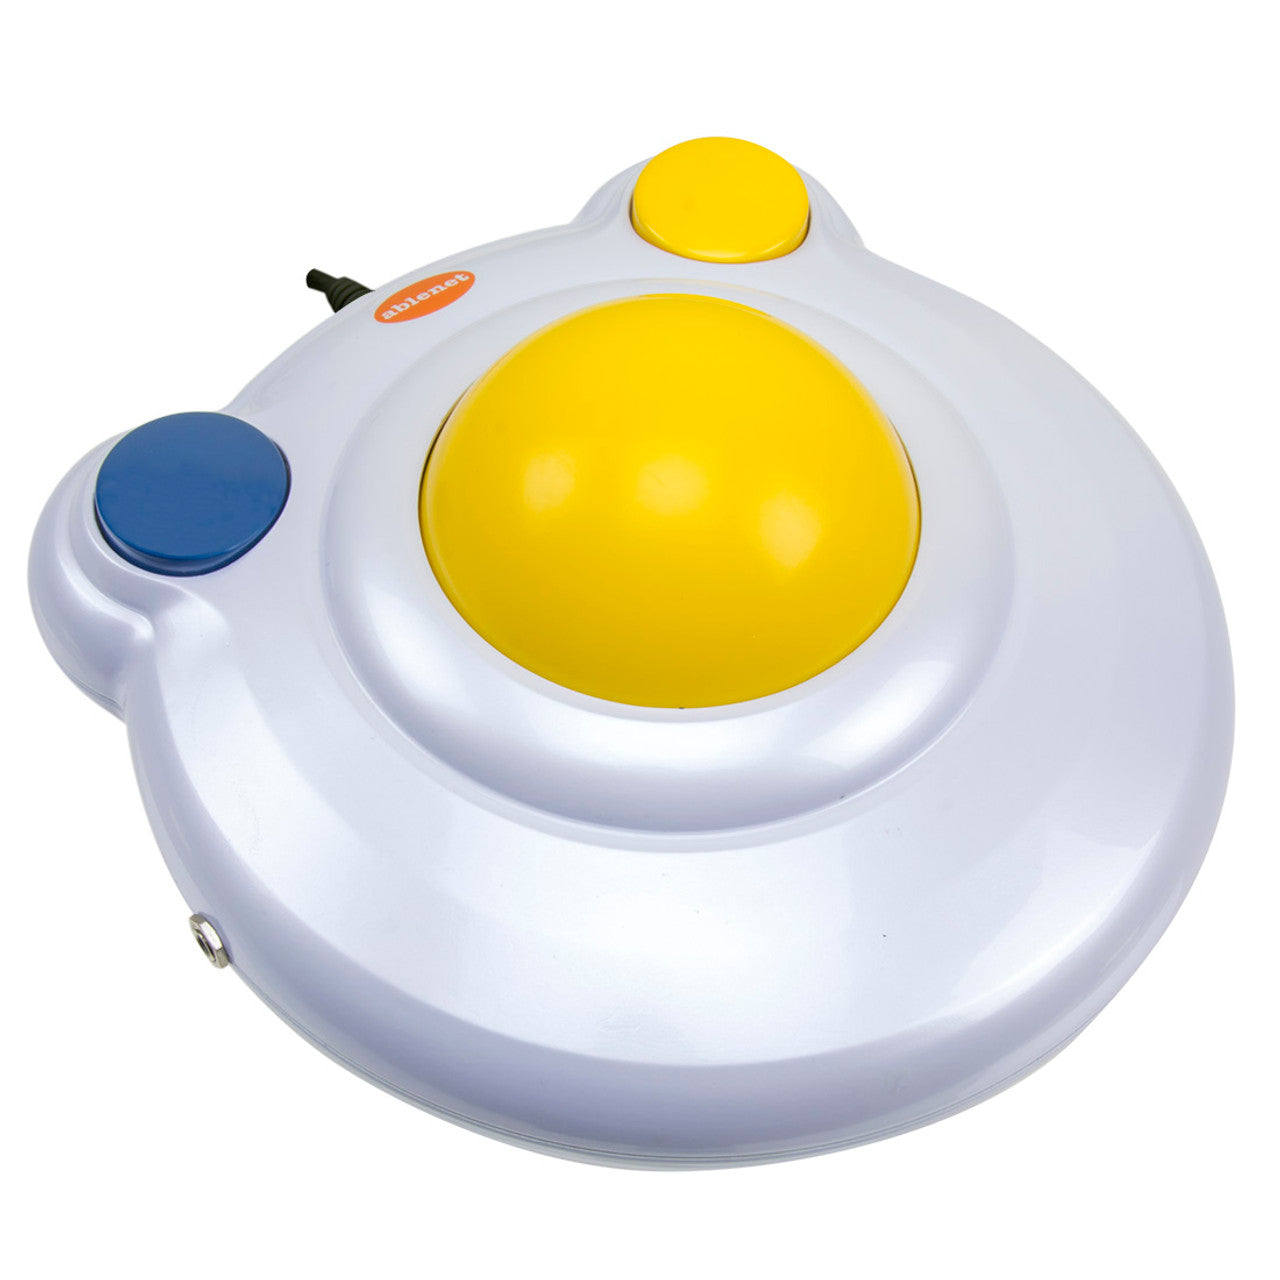 BIGtrack 2 Switch Adapted Trackball